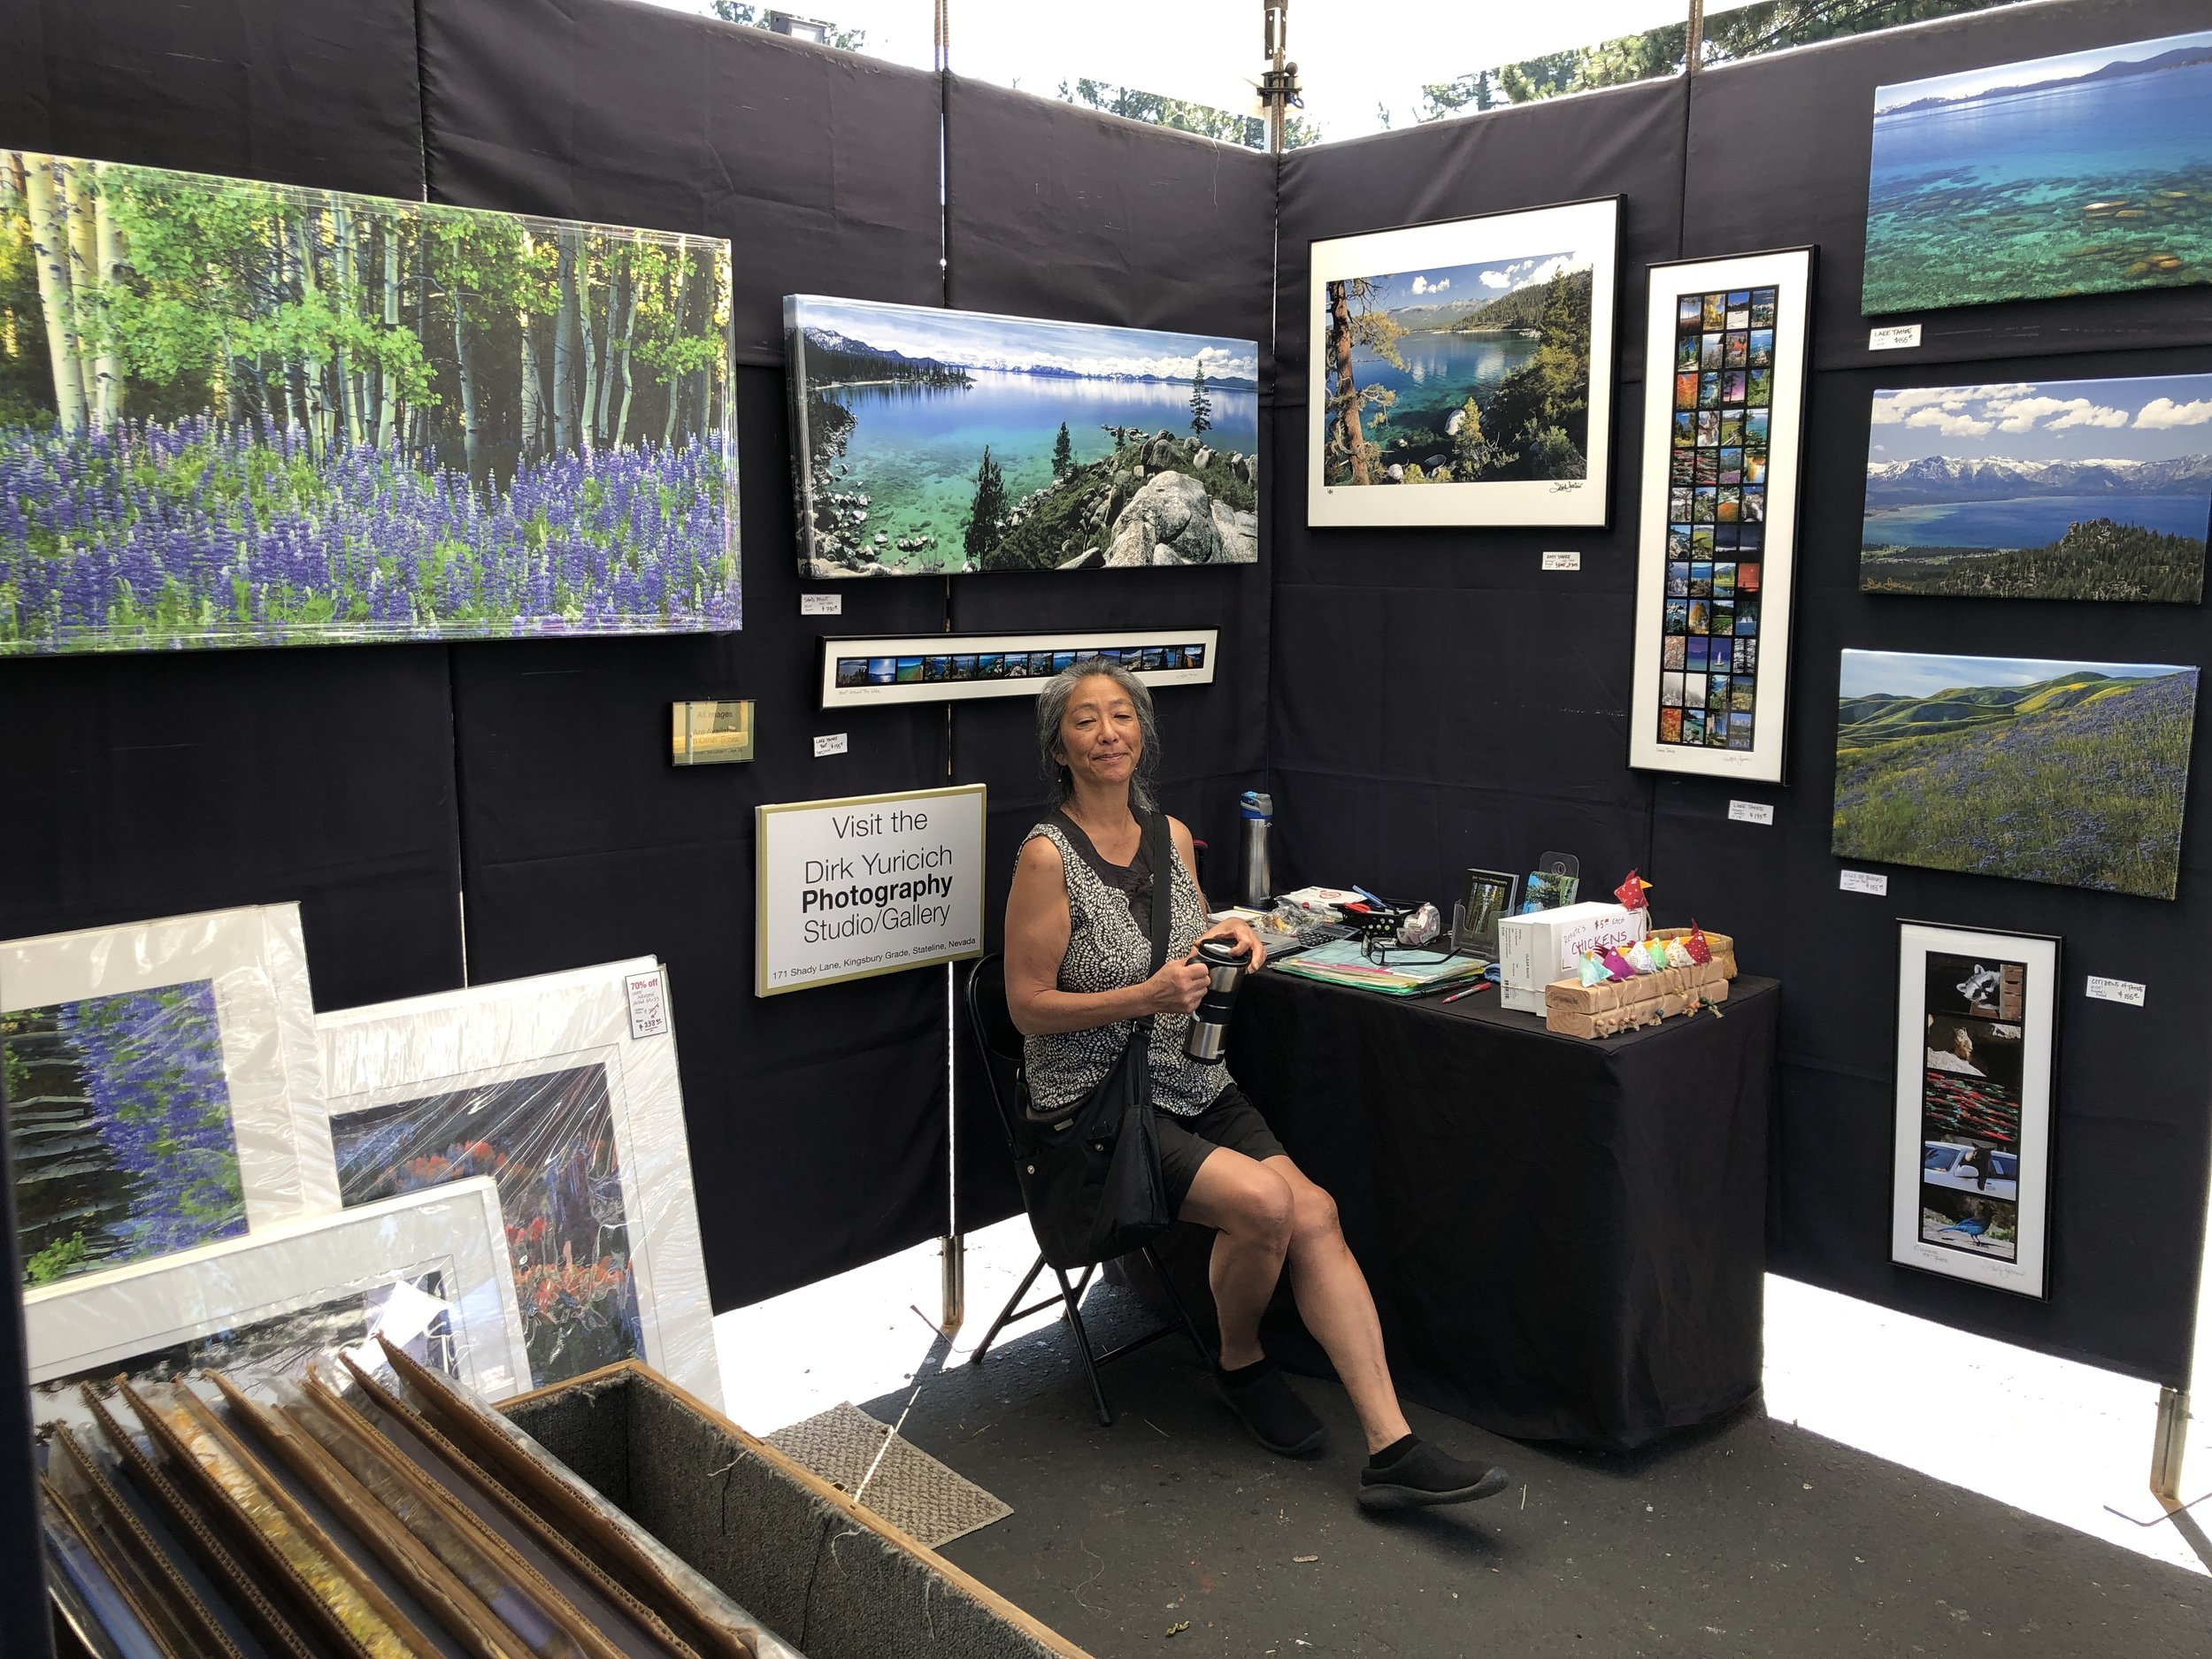 Lisa at the Dirk Yuricich Photography Booth